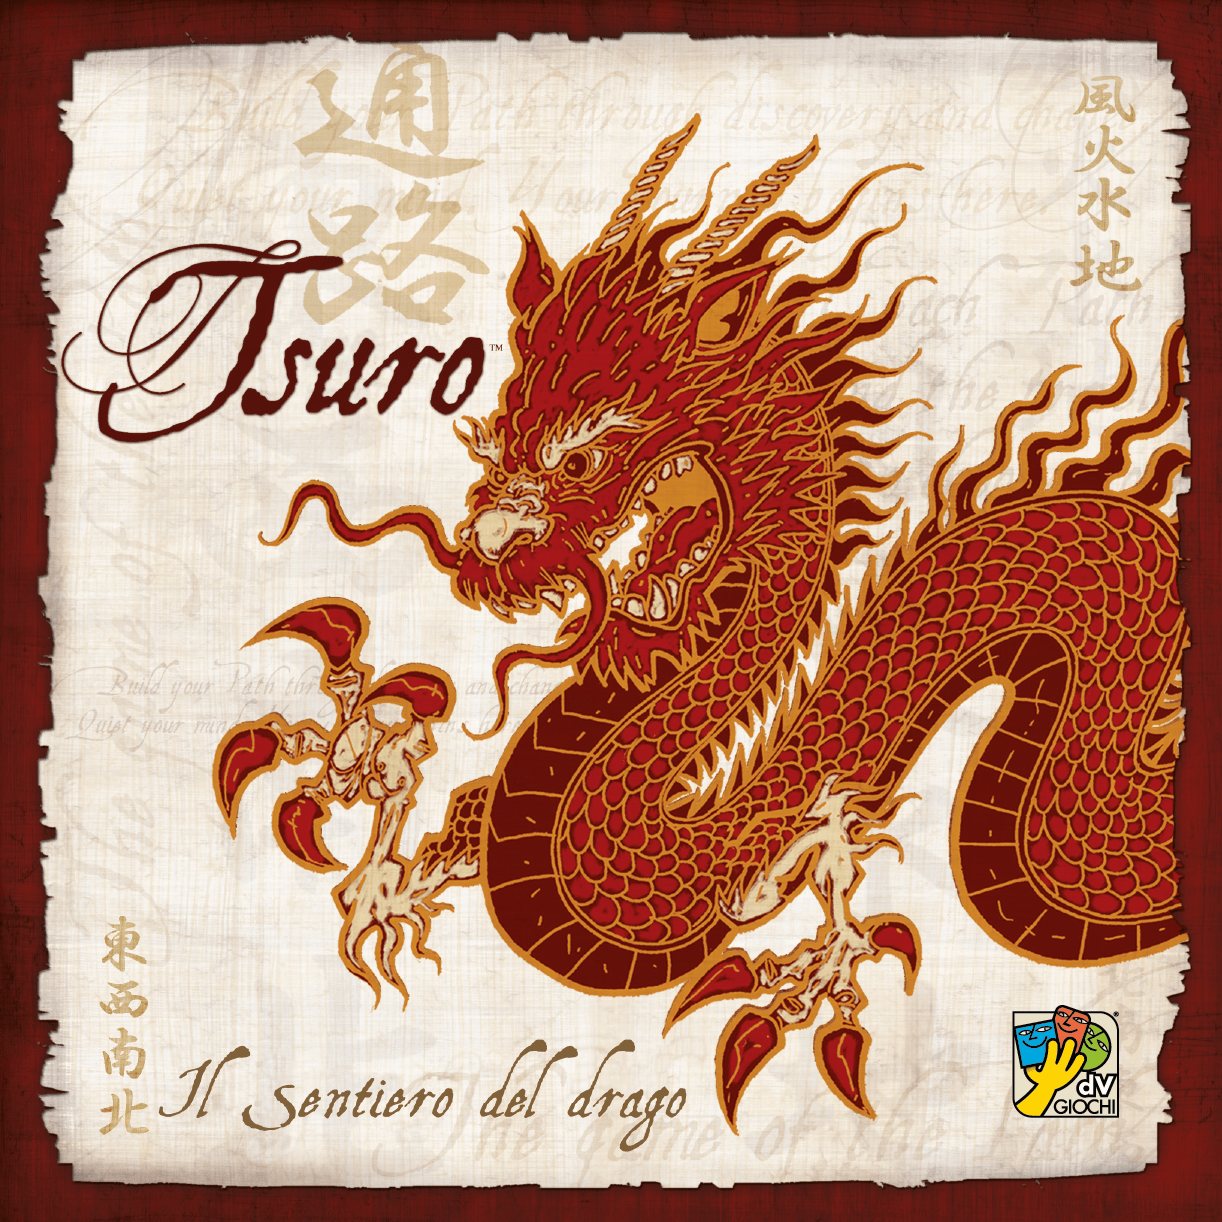 Tsuro review: follow the path… the right one 